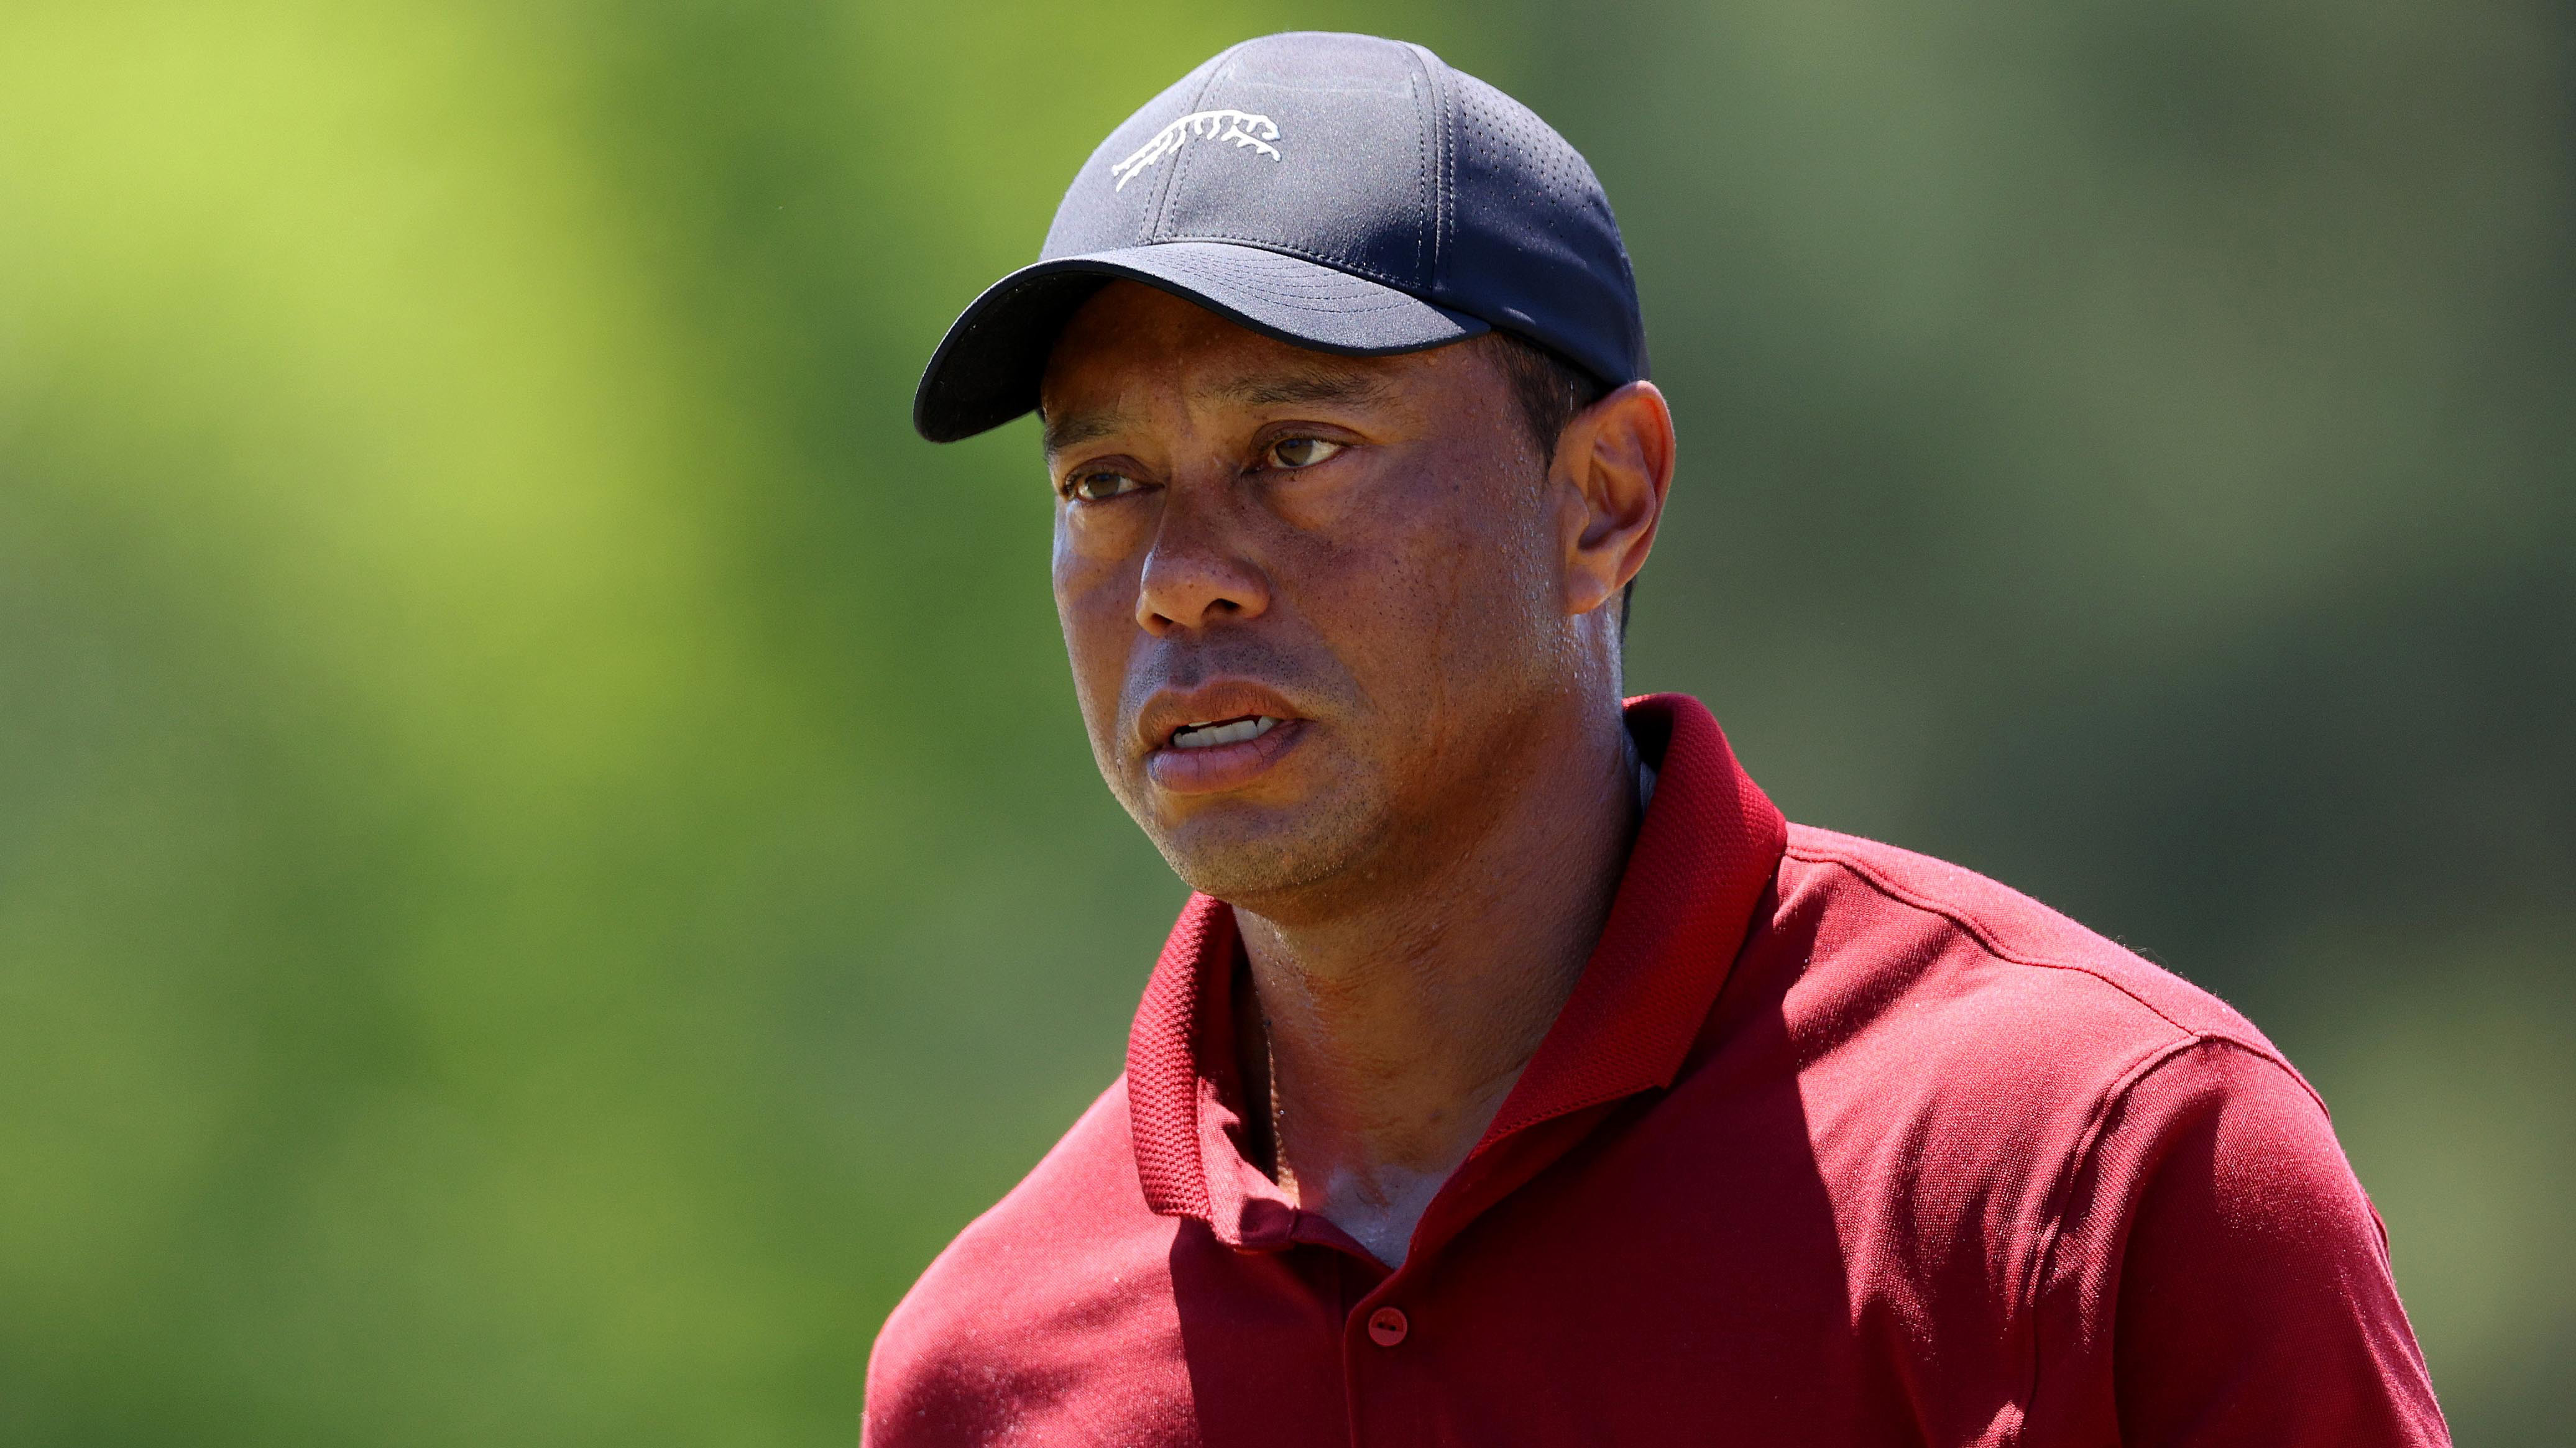 Tiger Woods finishes Masters at 16over 304, his highest score as a